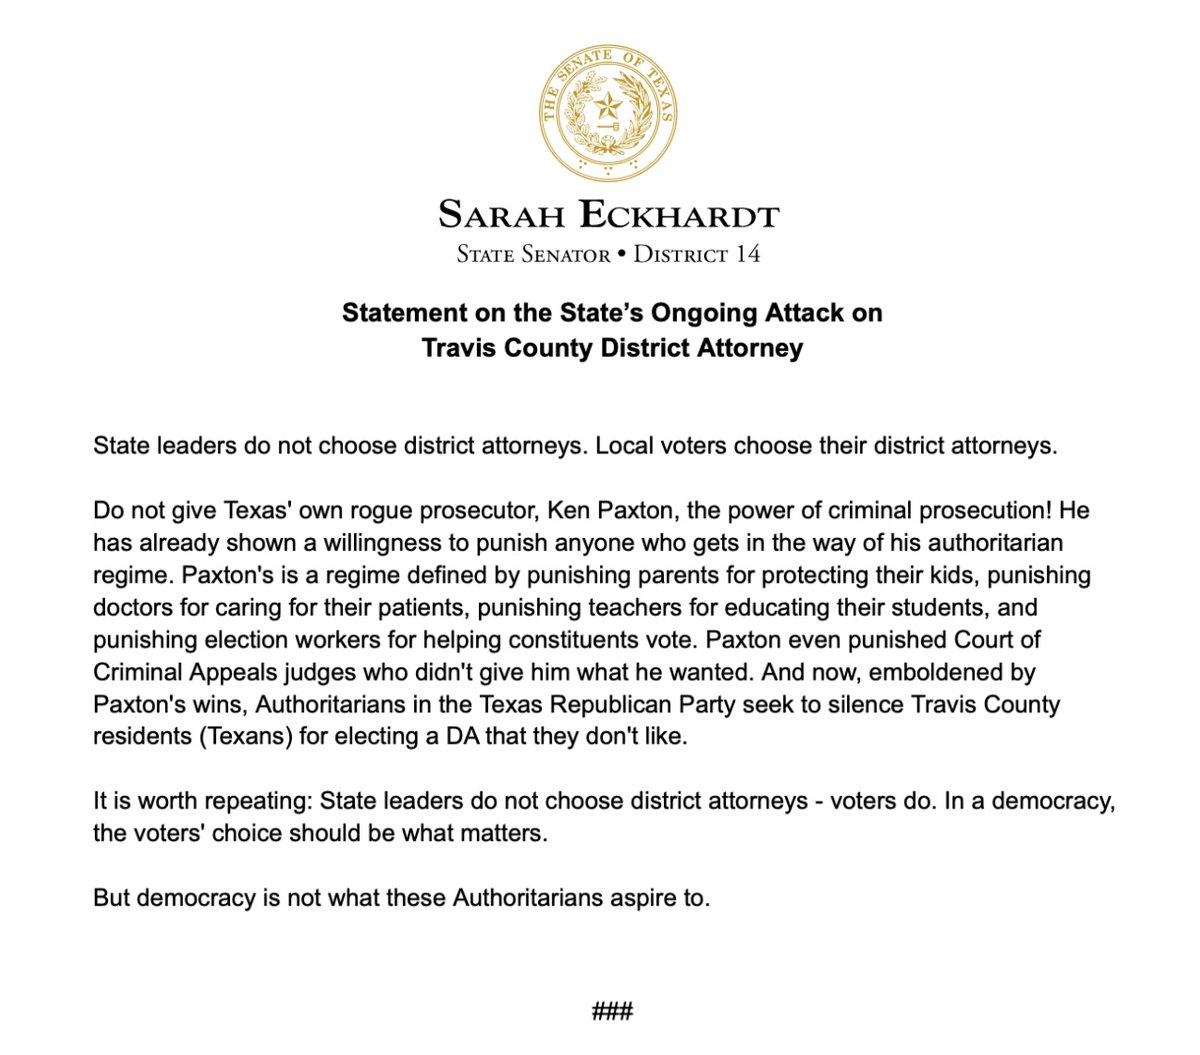 This is a move straight out of the Authoritarian Playbook of Texas' very own rogue prosecutor, @KenPaxtonTX. State leaders do not choose district attorneys - that is a privilege that belongs solely to local voters. #txlege